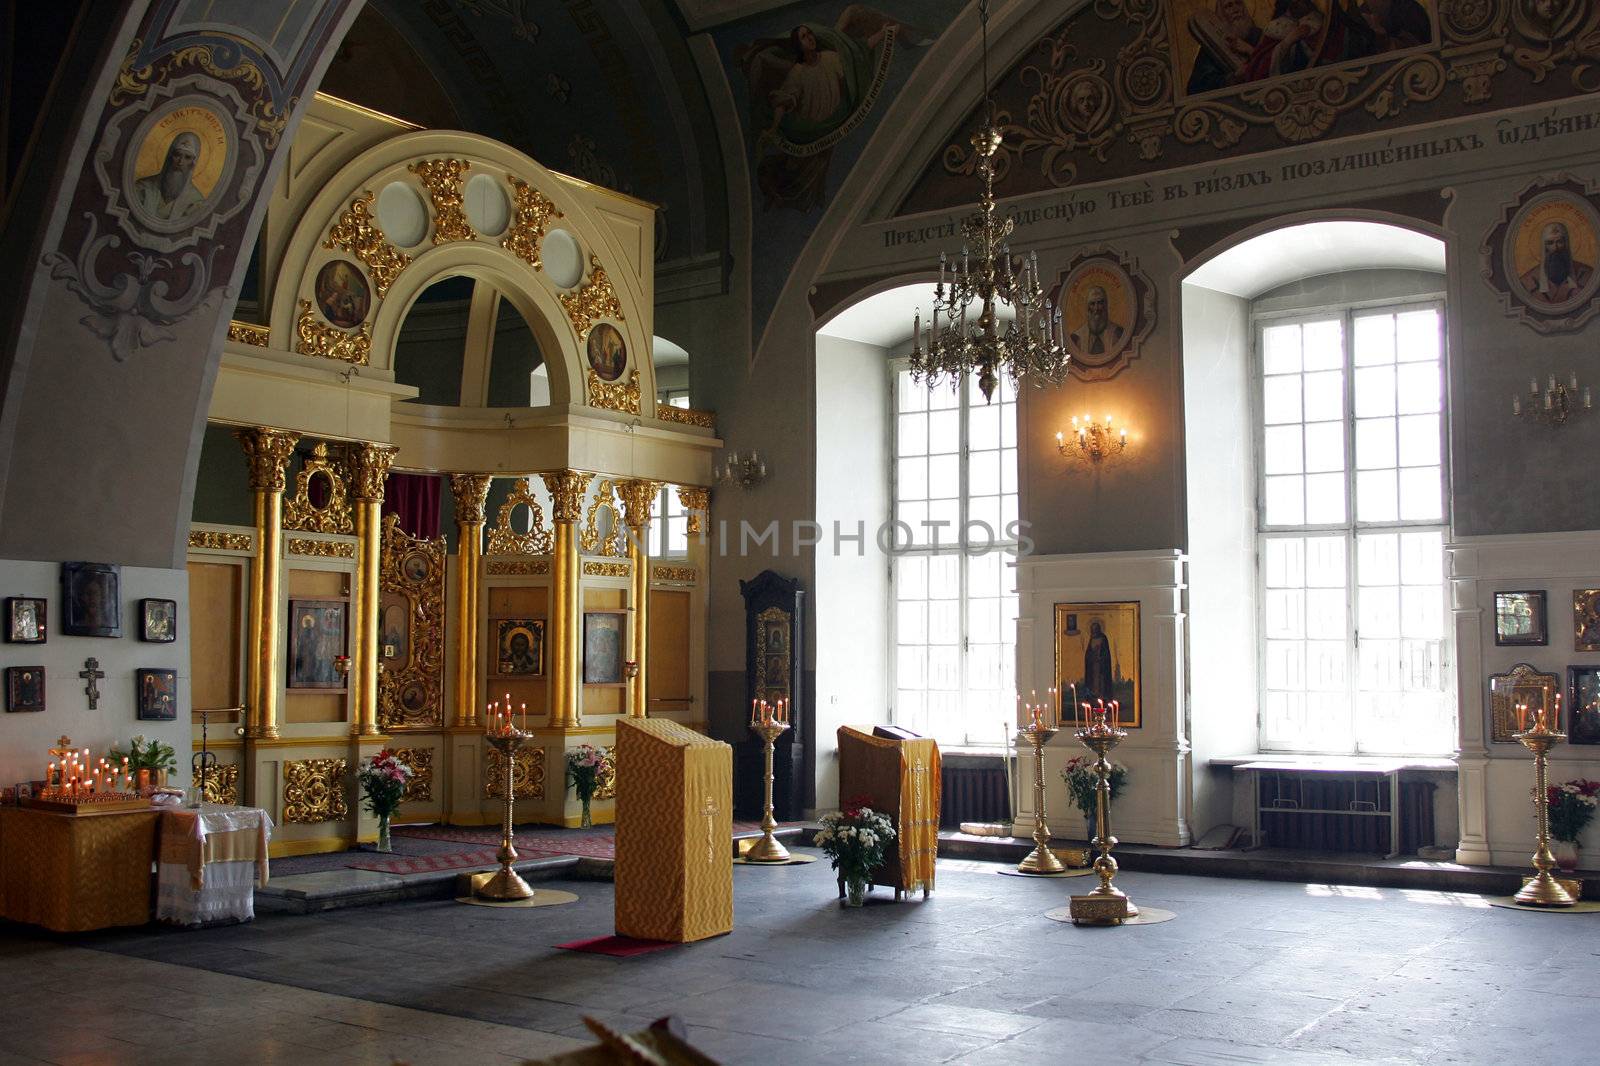 Details of interior of Greek Orthodox Cathedral.